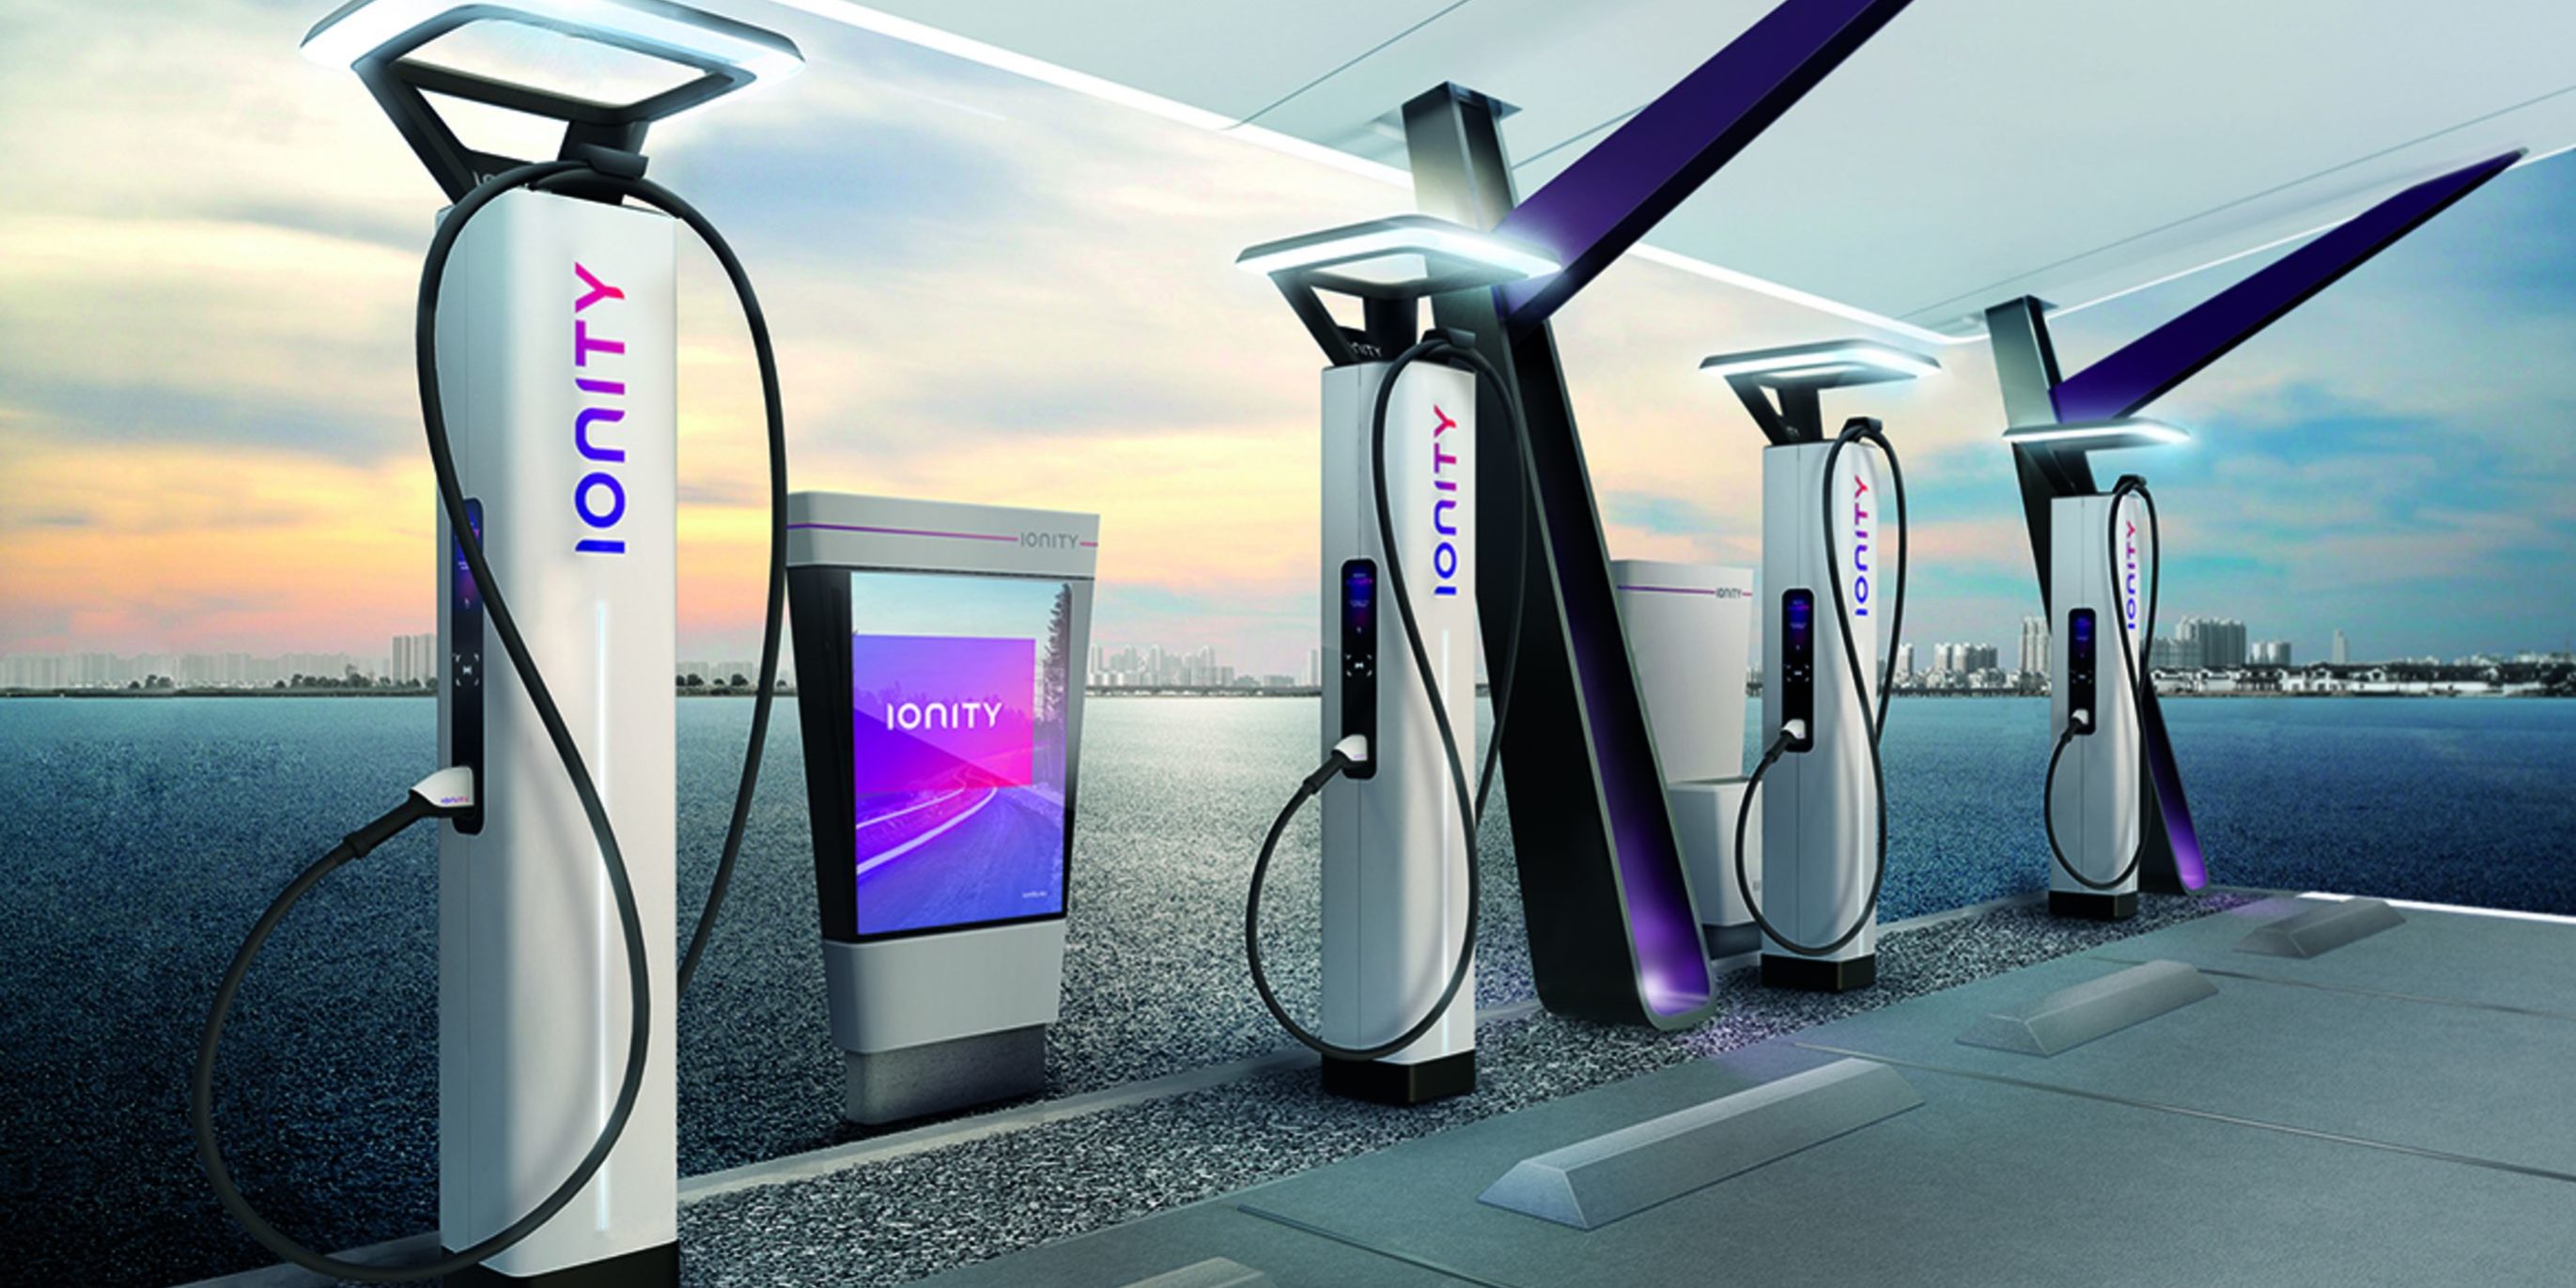 New Australianmade fast EV charger unveiled at Frankfurt Motor Show